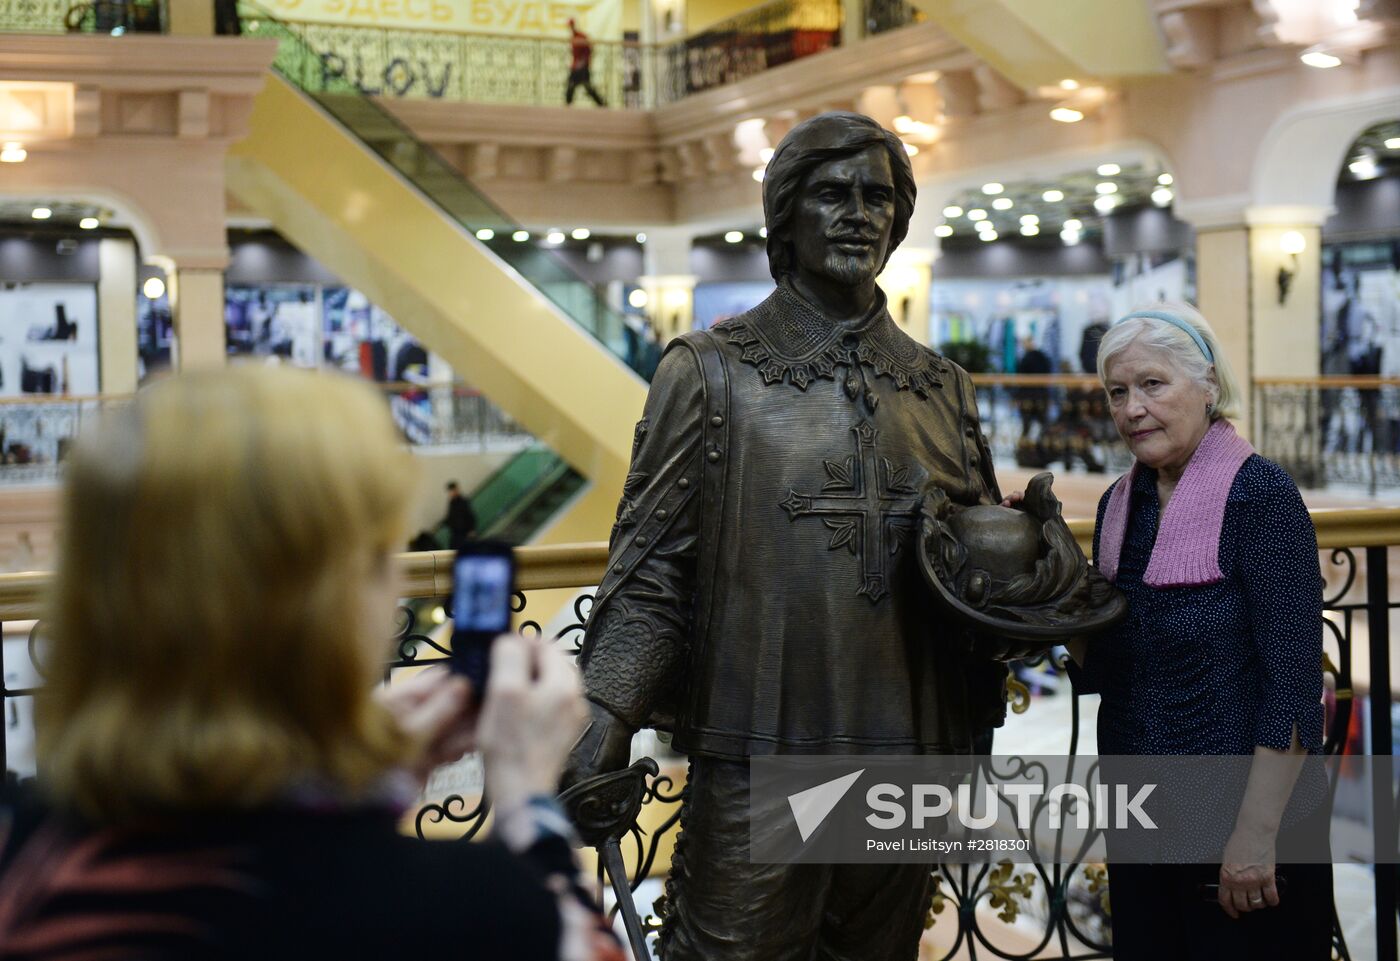 Sculptures of "D'Artagnan and Three Musketeers" movie characters unveiled in Yekaterinburg